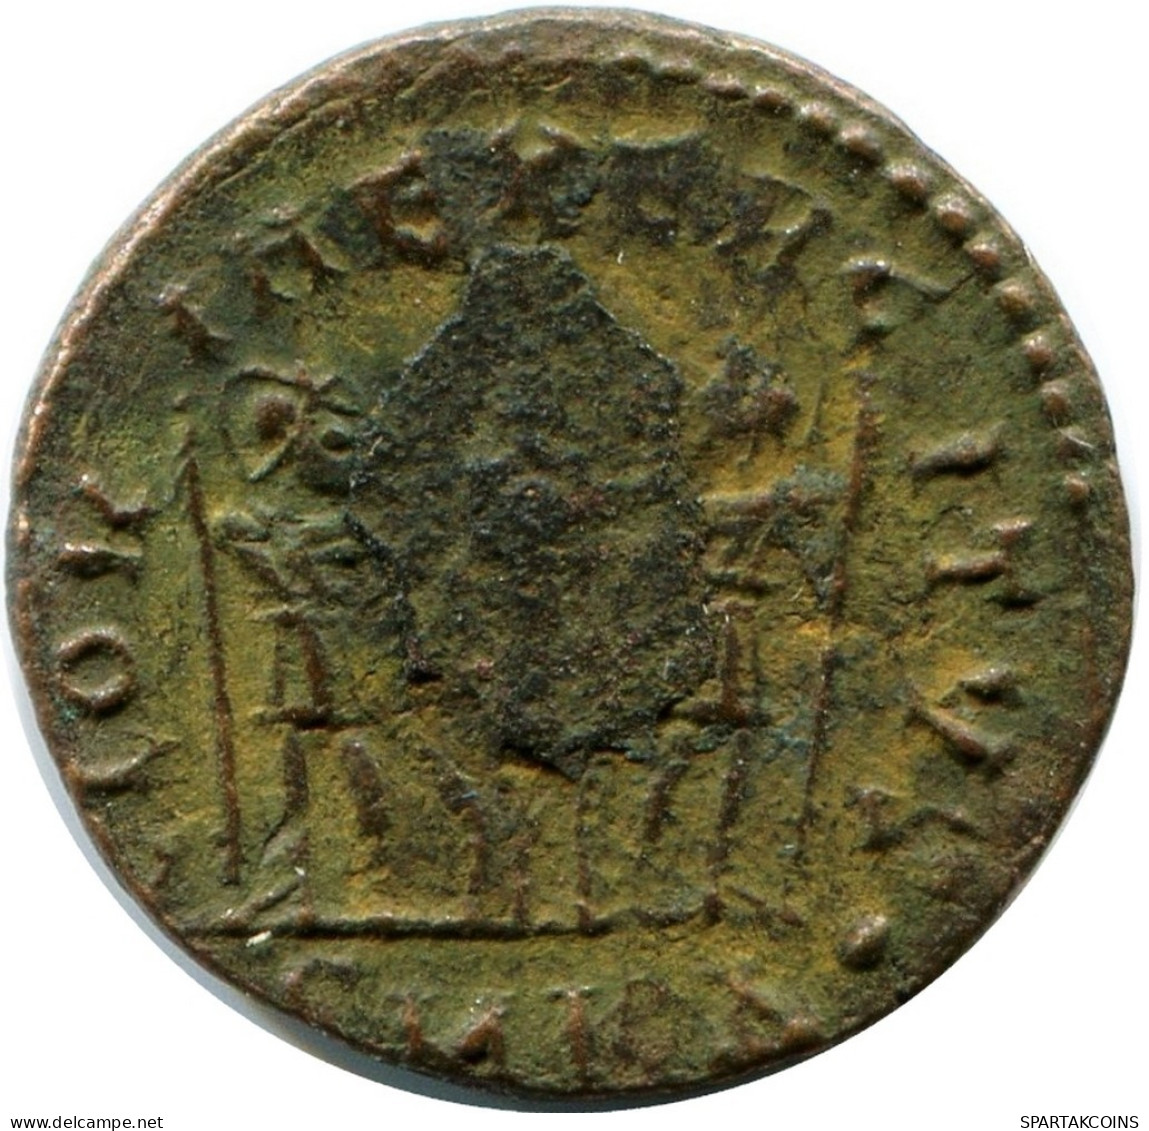 CONSTANS MINTED IN CYZICUS FROM THE ROYAL ONTARIO MUSEUM #ANC11626.14.D.A - L'Empire Chrétien (307 à 363)